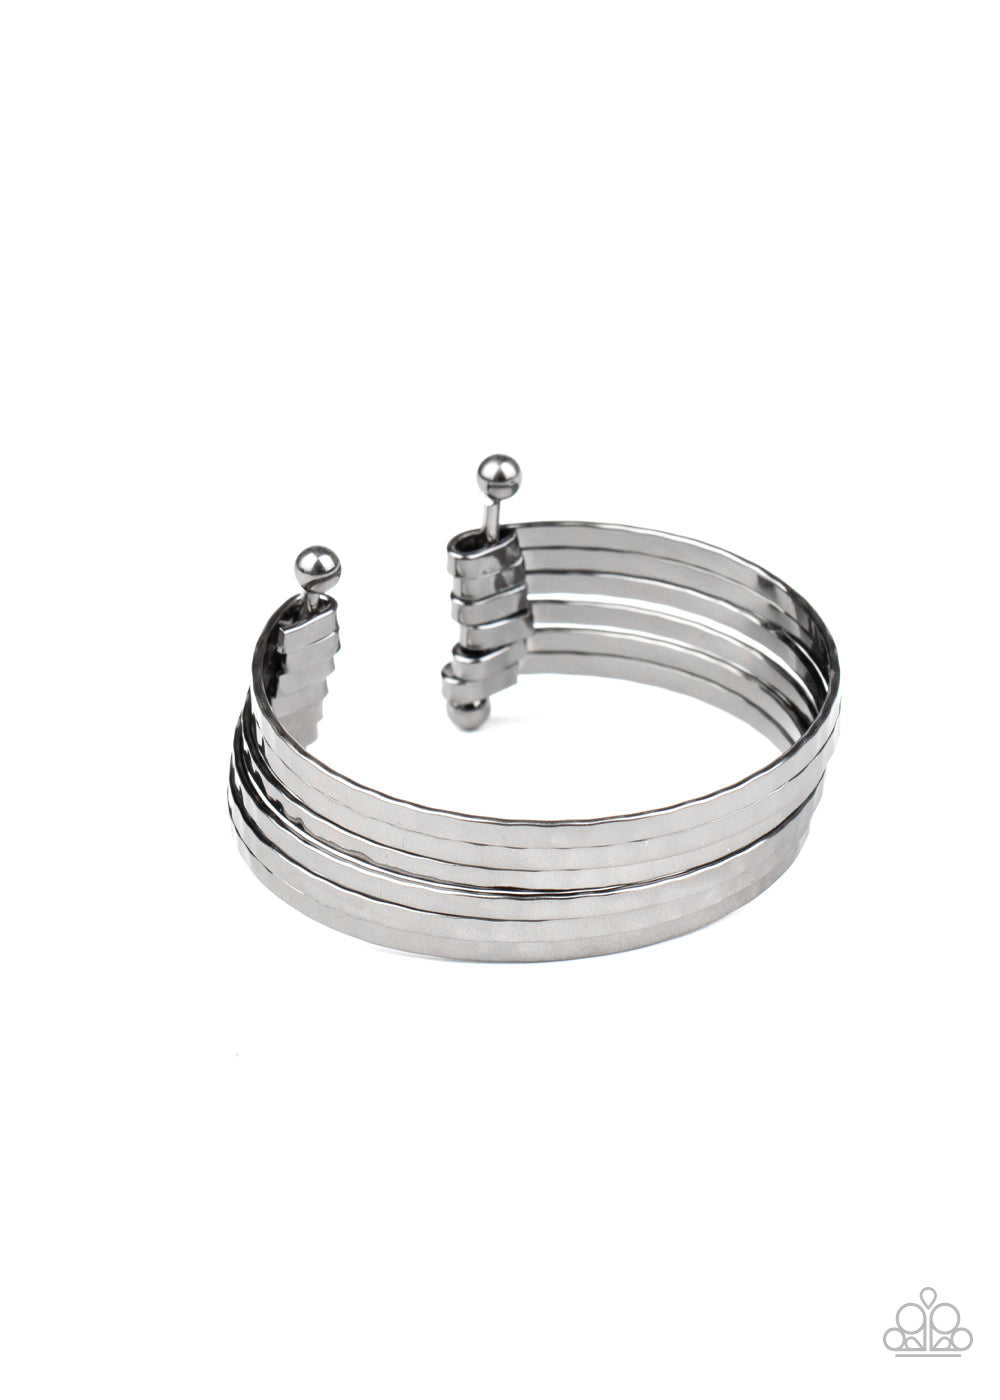 &lt;P&gt;Brushed in a high-sheen shimmer, hammered gunmetal bars arc across the wrist. The flattened bars connect to two rod fittings, creating a trendy layered cuff.
&lt;/P&gt;  

&lt;P&gt; &lt;I&gt;Sold as one individual bracelet.&lt;/I&gt;  &lt;/P&gt;


&lt;img src=\&quot;https://d9b54x484lq62.cloudfront.net/paparazzi/shopping/images/517_tag150x115_1.png\&quot; alt=\&quot;New Kit\&quot; align=\&quot;middle\&quot; height=\&quot;50\&quot; width=\&quot;50\&quot;/&gt;